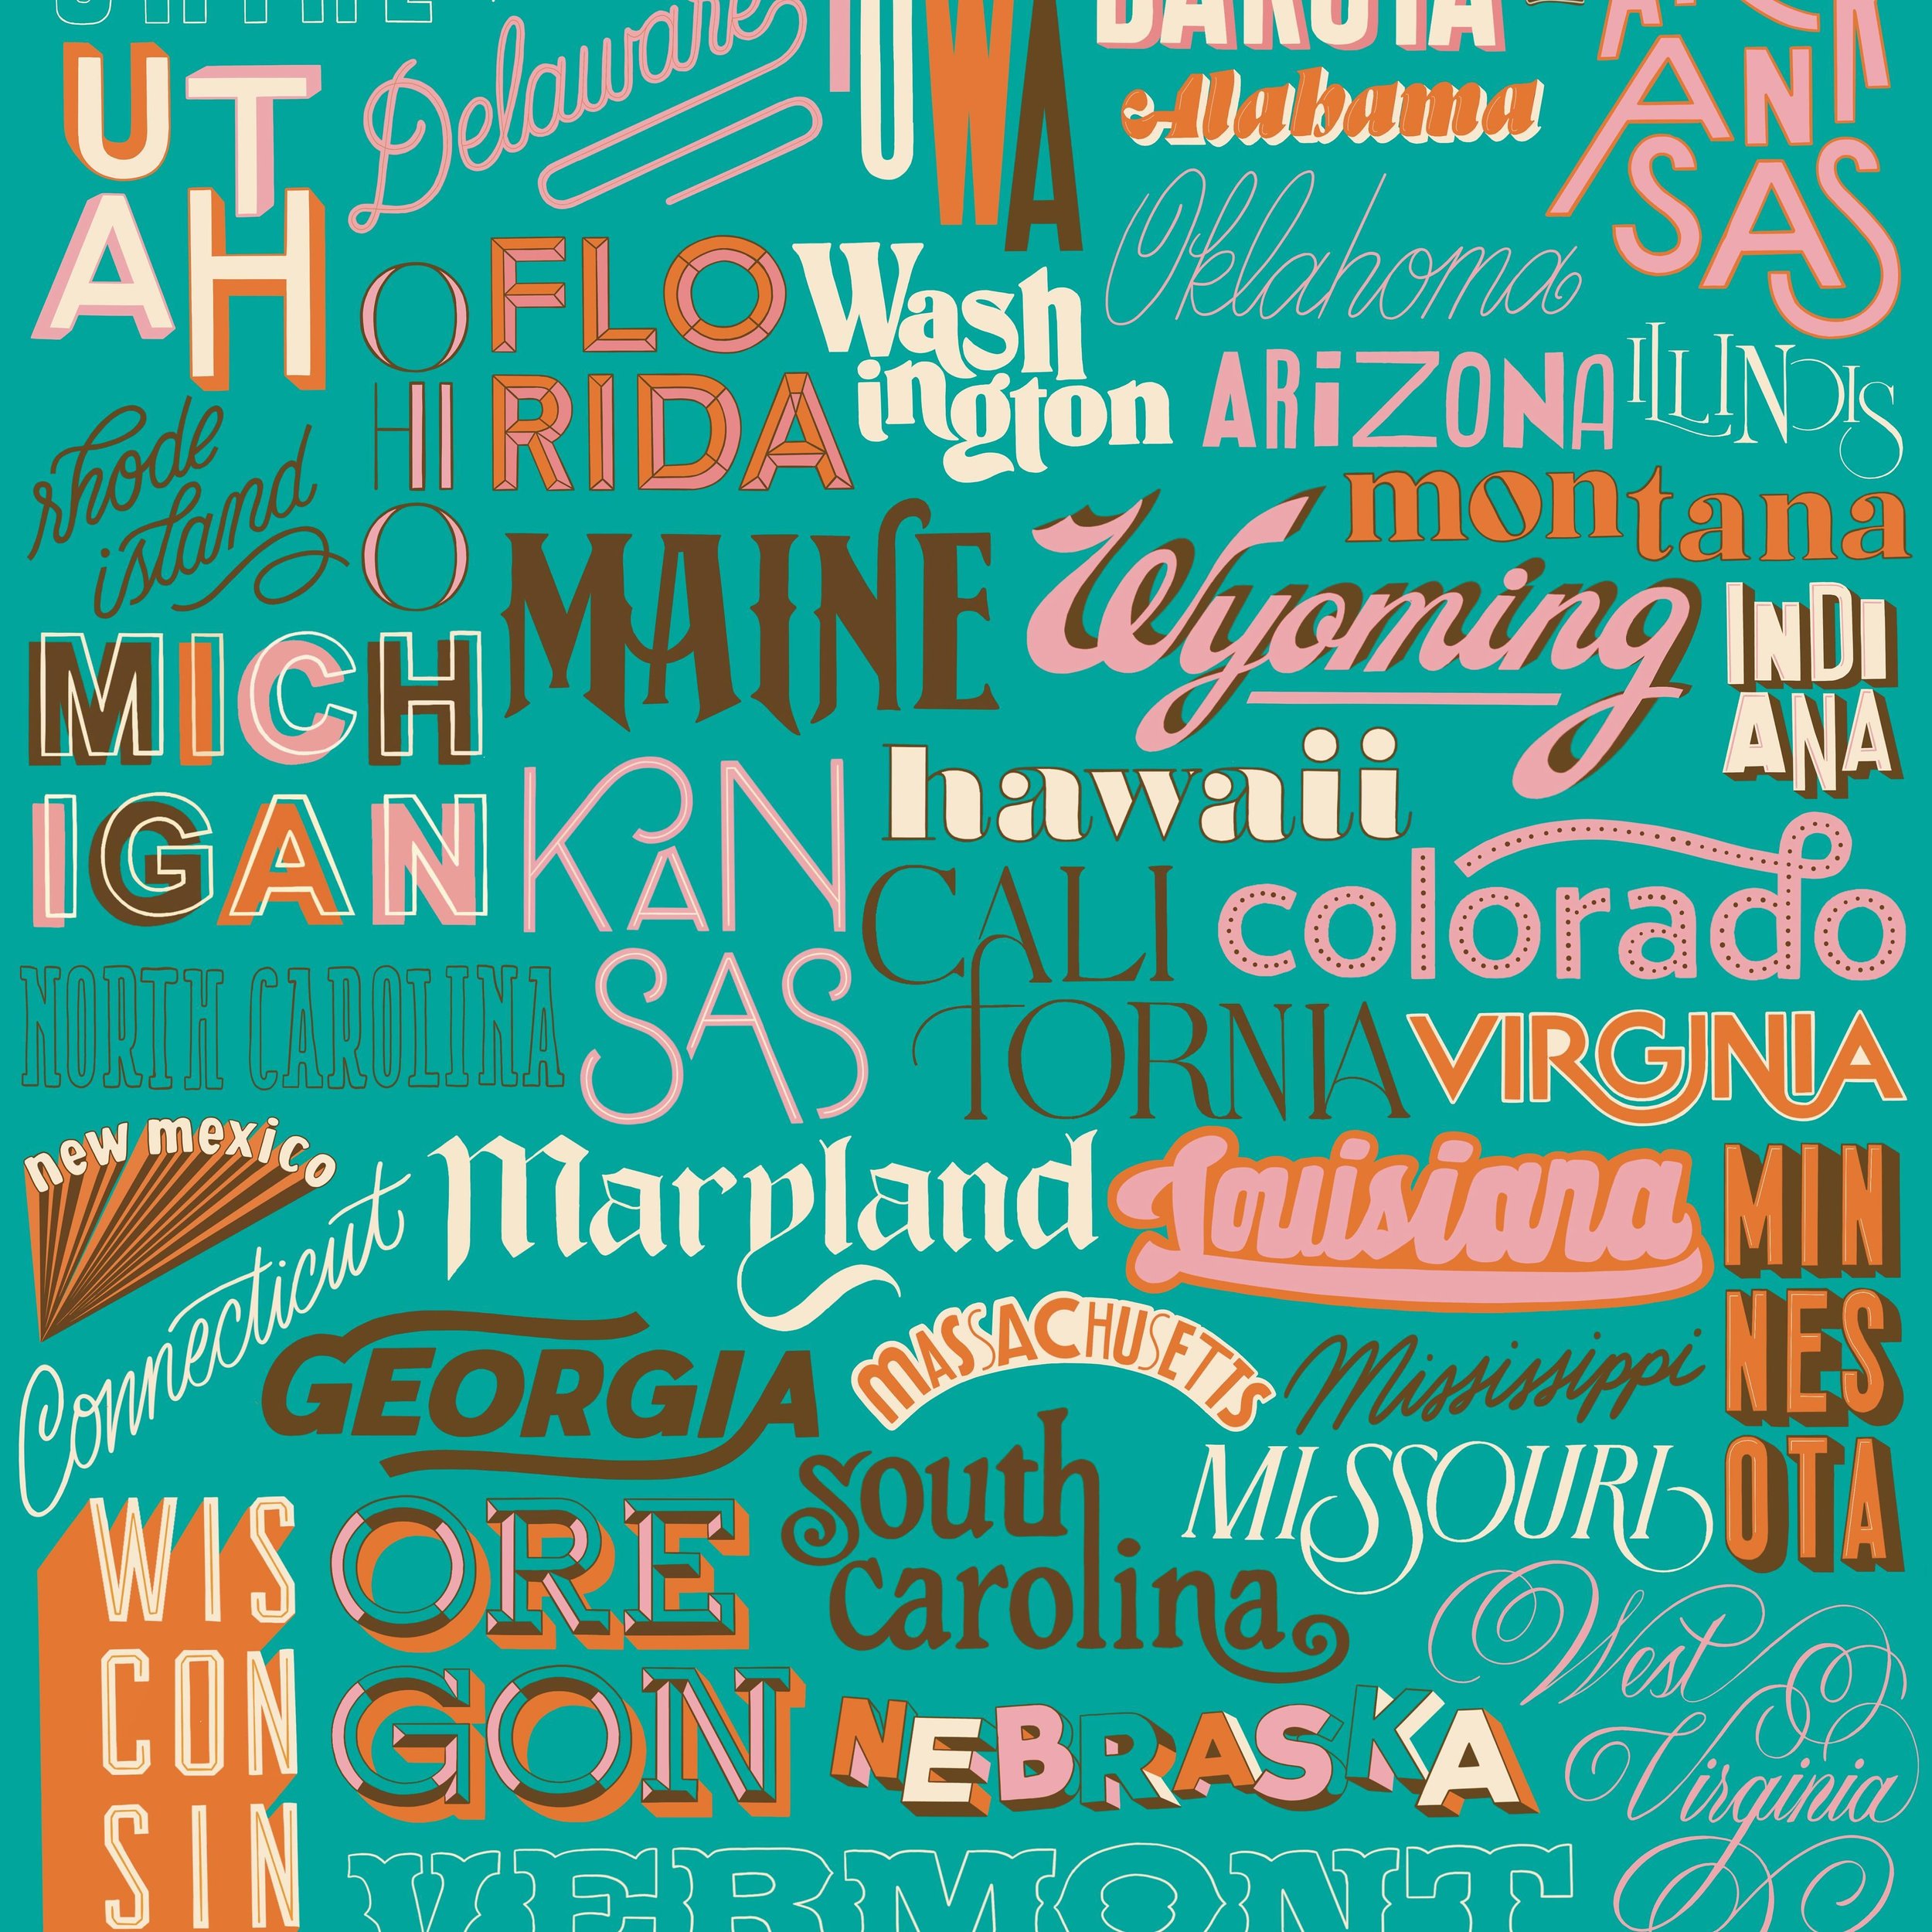 Just checked off painting in my 32nd state- shout out to Utah! 

Created this as jigsaw puzzle design last year and it was so much fun to do. I do a lot of illustration these days but lettering will always have my ❤️. People ask how I got so good at 